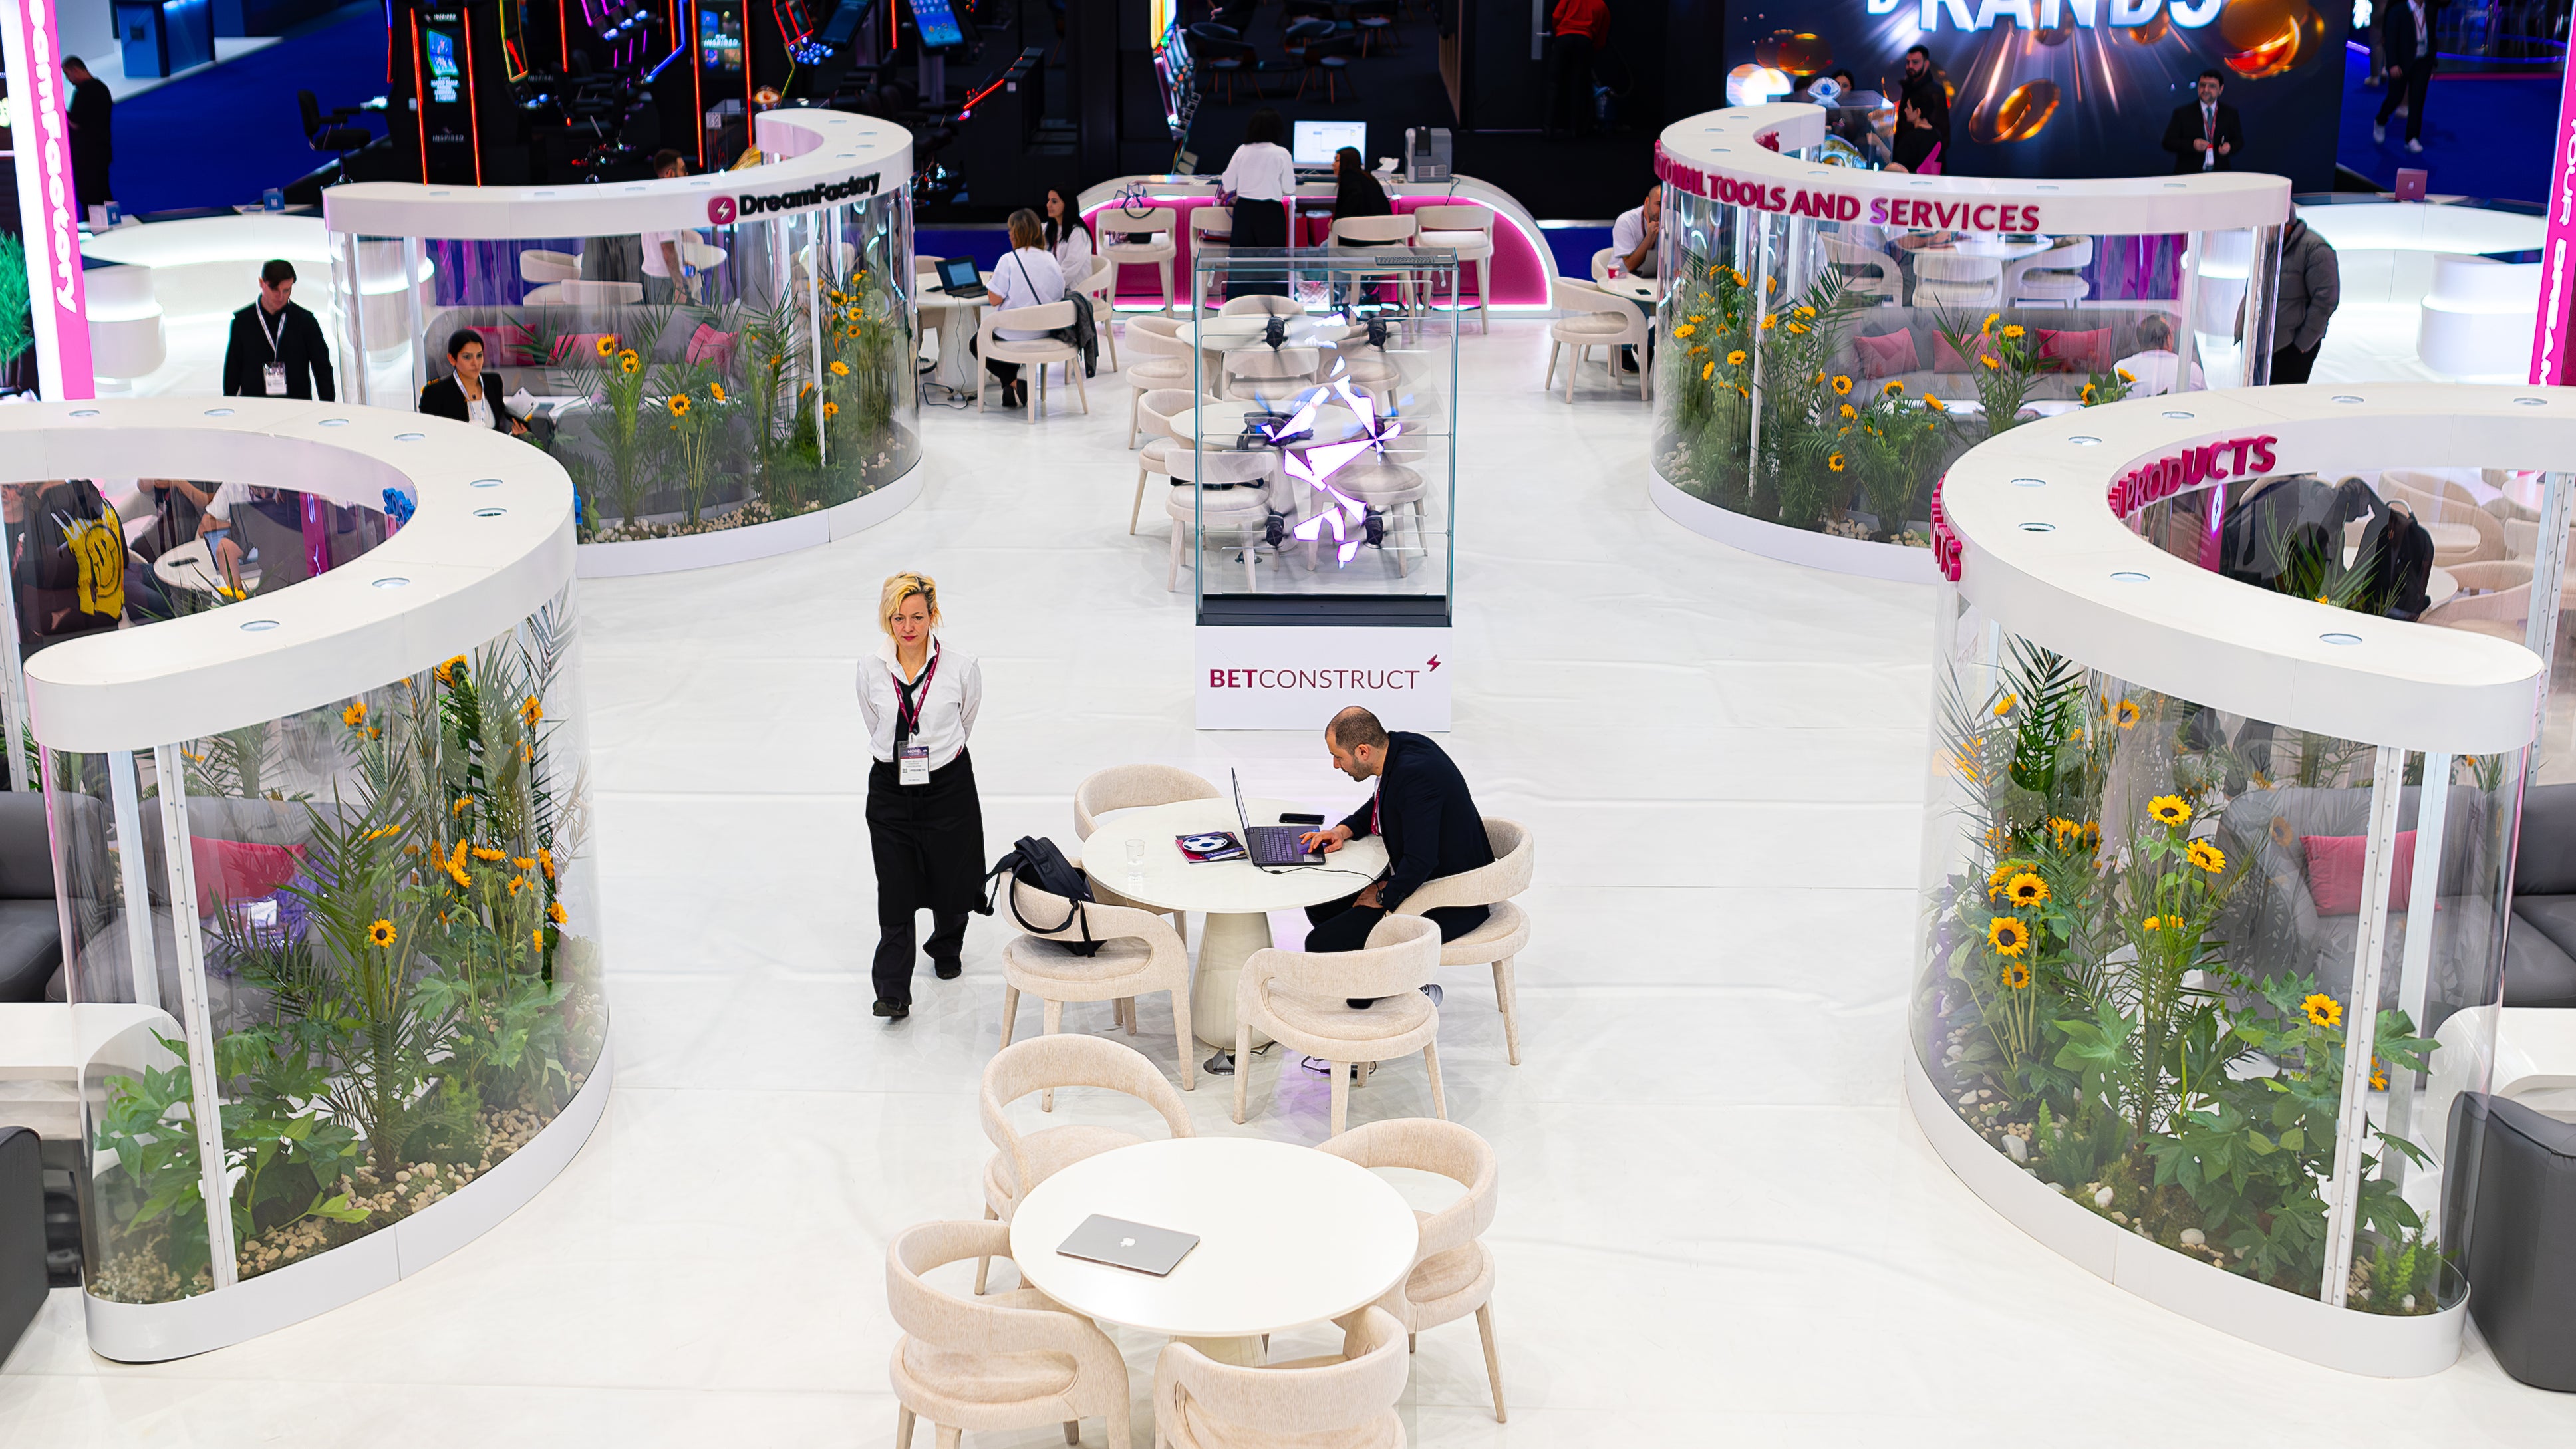 In the image, circular floral installations serve as decoration and partition within the corporate event space. These arrangements prominently feature yellow sunflowers complemented by a variety of green foliage. The flowers are encased in clear, cylindrical displays, interspersed among seating areas and workstations, providing a natural and vibrant contrast to the event's predominantly white and modern setting at the ICE London Exhibition.